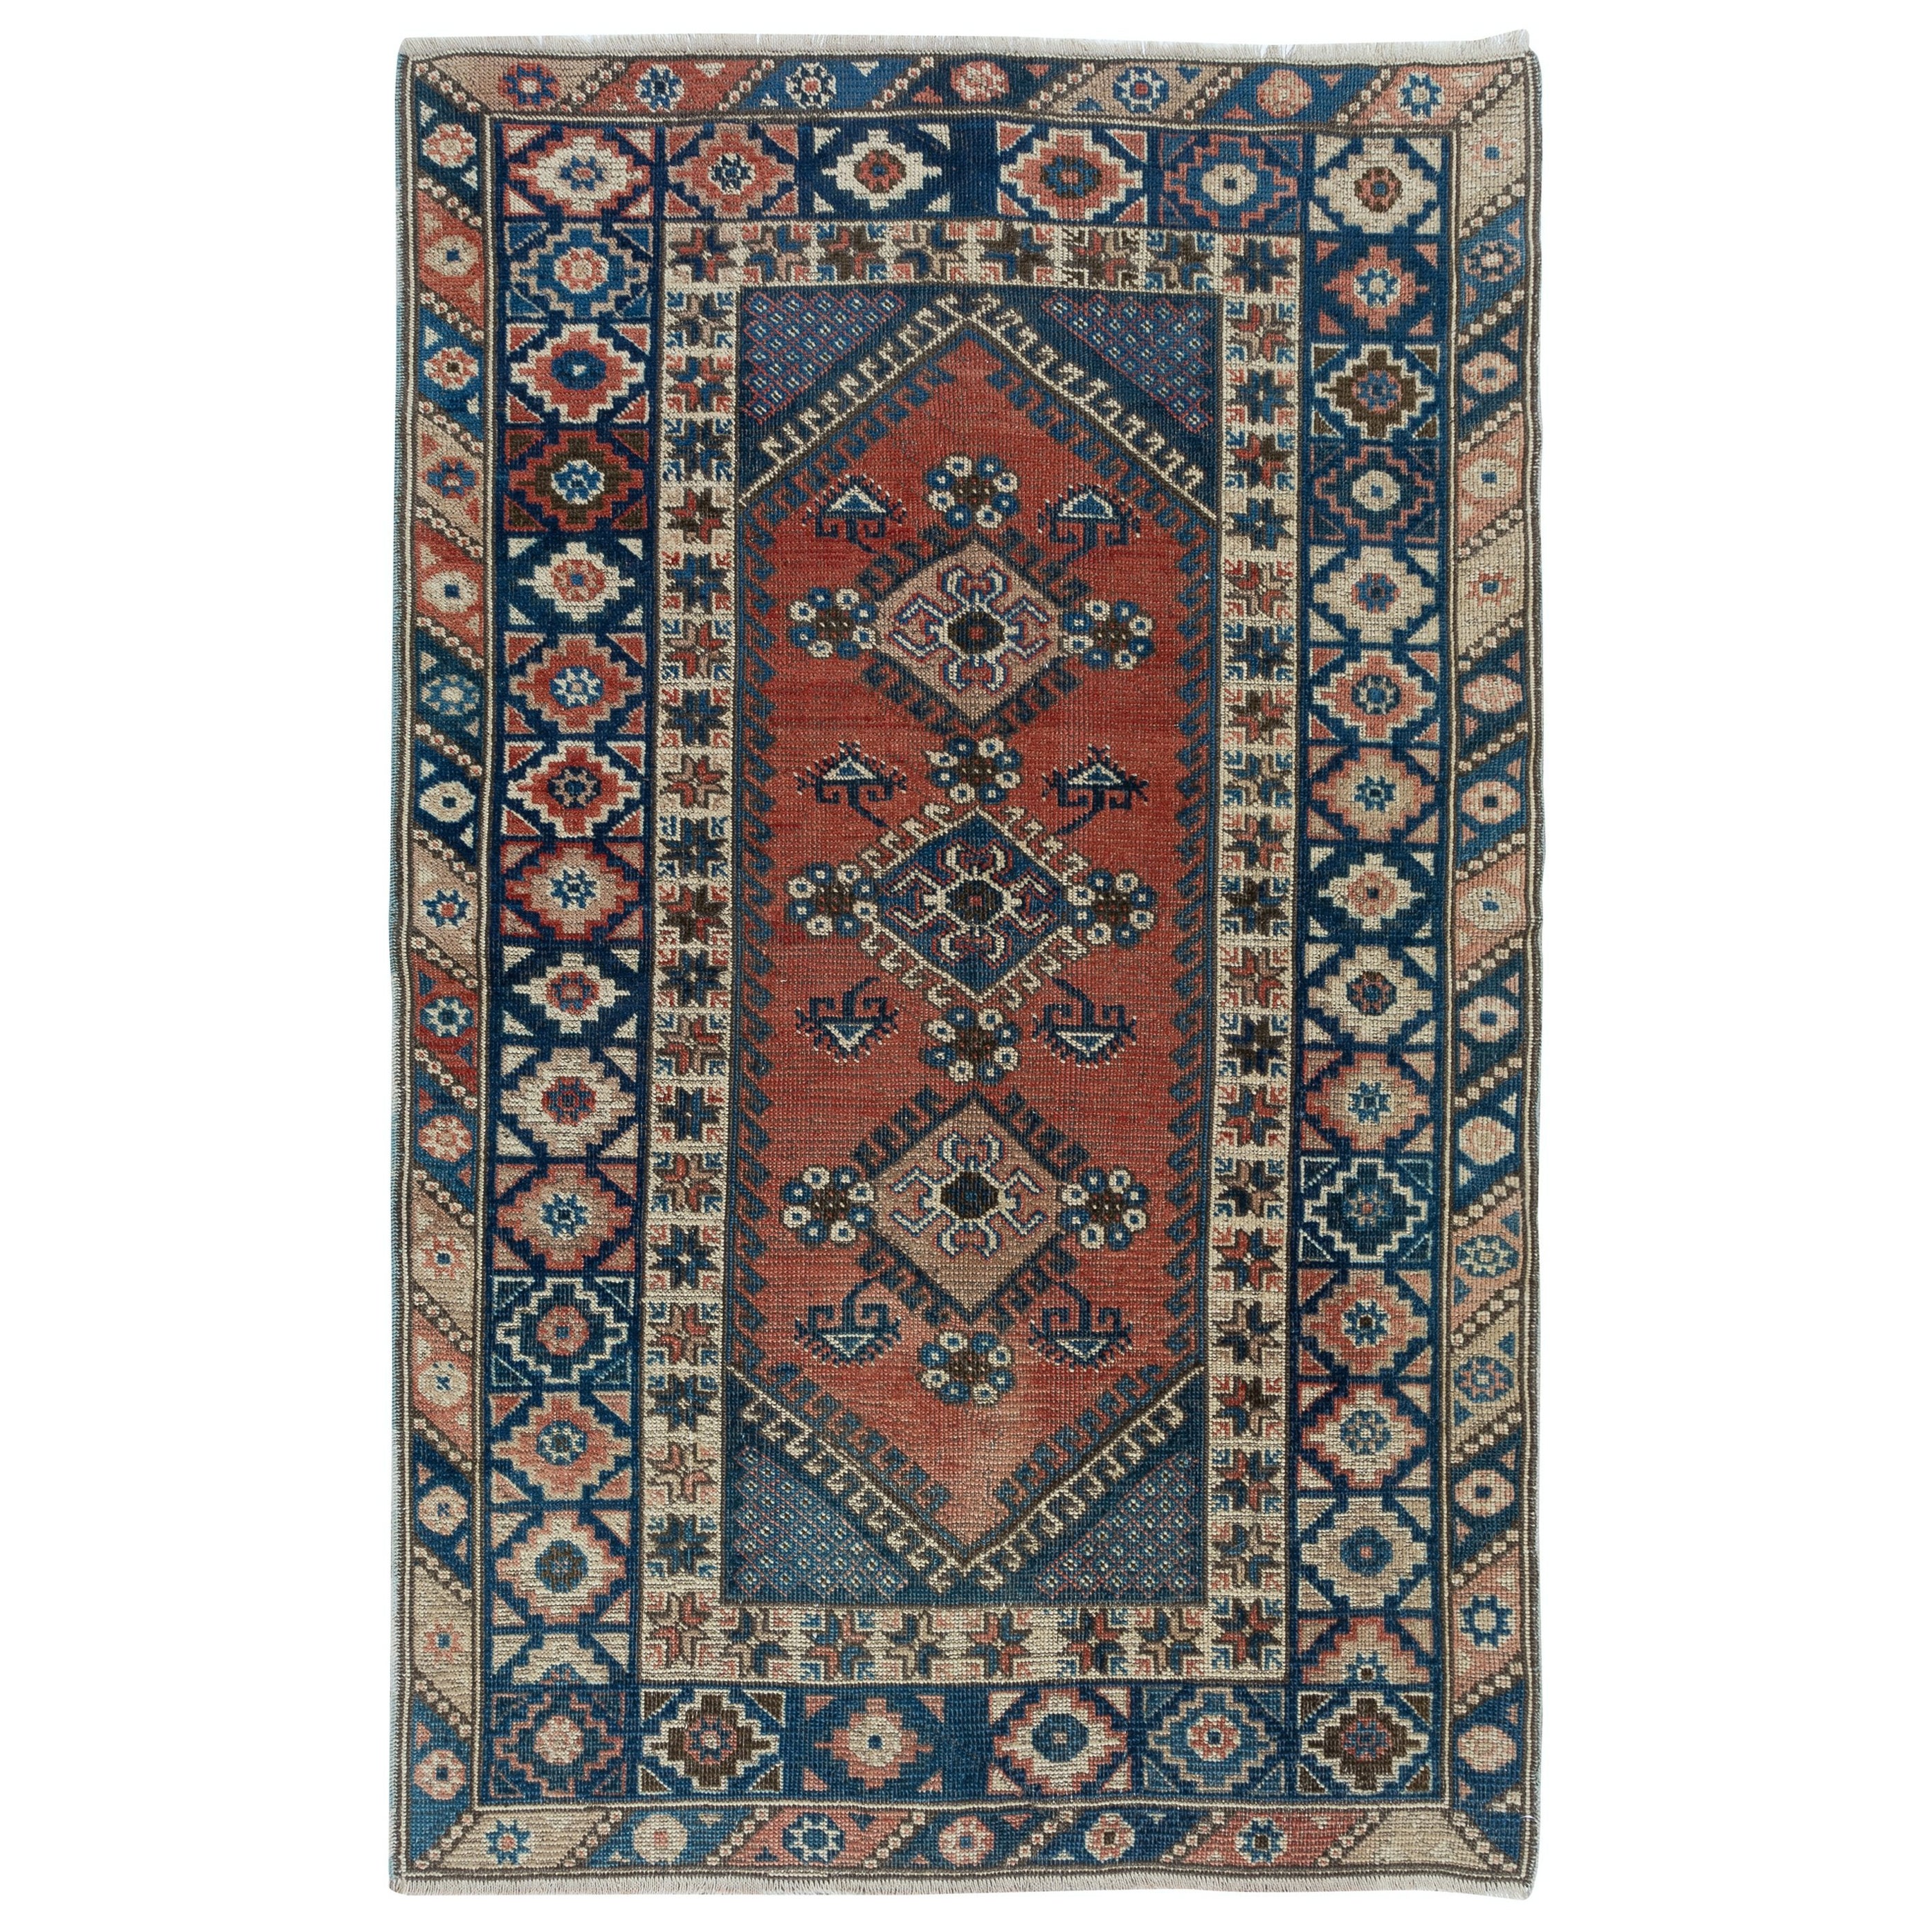 4x6 Ft Traditional Vintage Handmade Turkish Rug with Medallions, Colorful Carpet